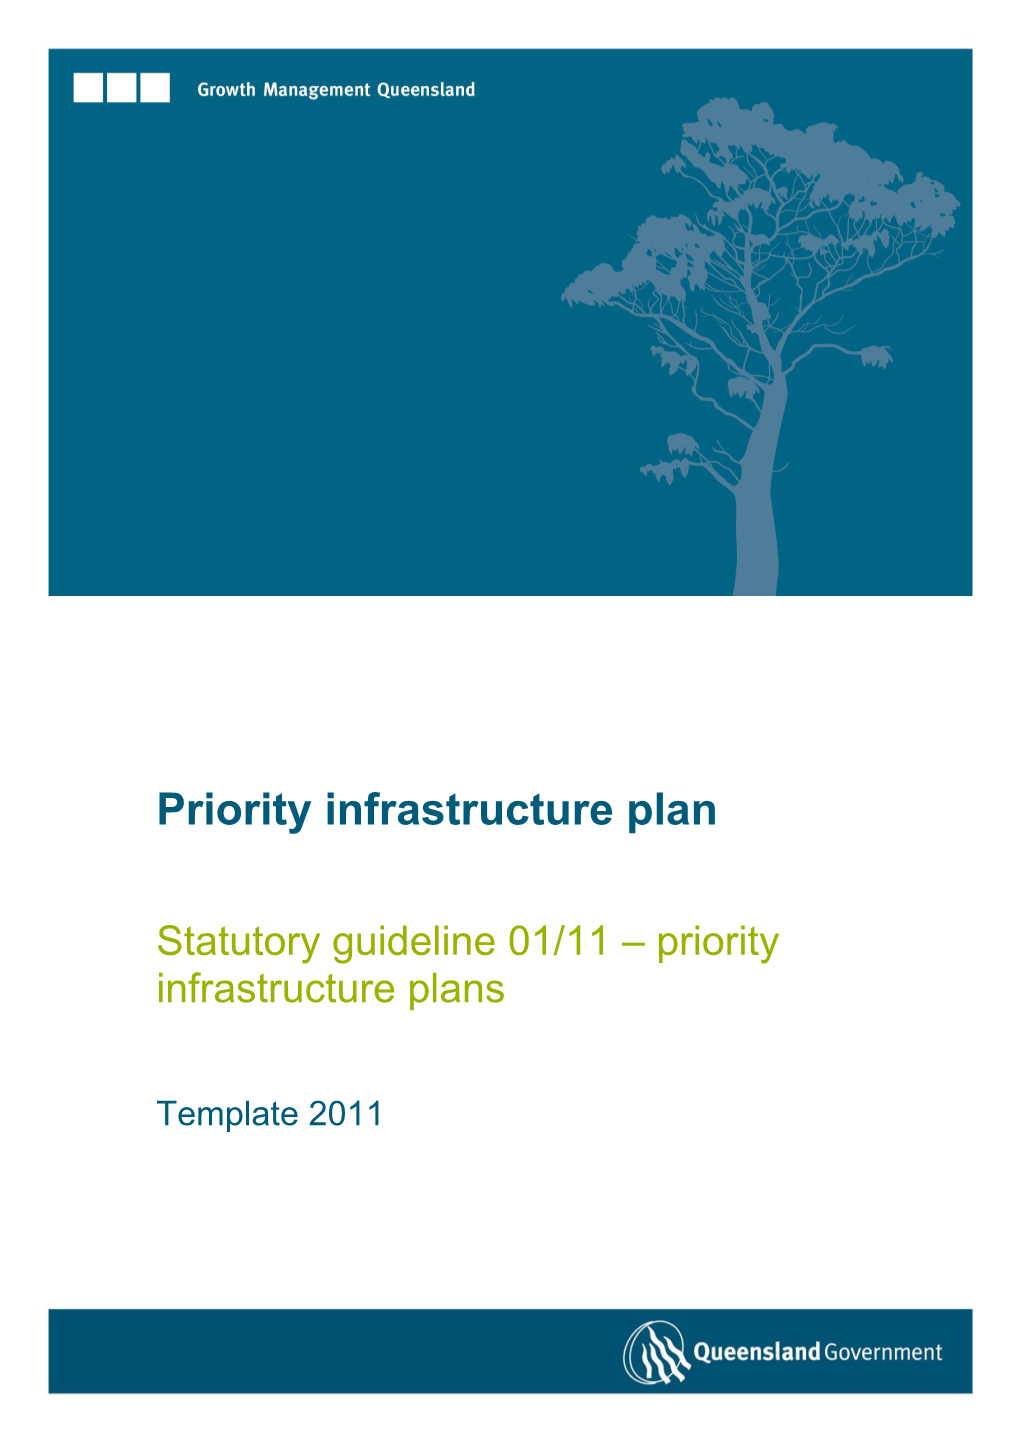 Statutory Guideline 01/11 - Priority Infrastructure Plans Template